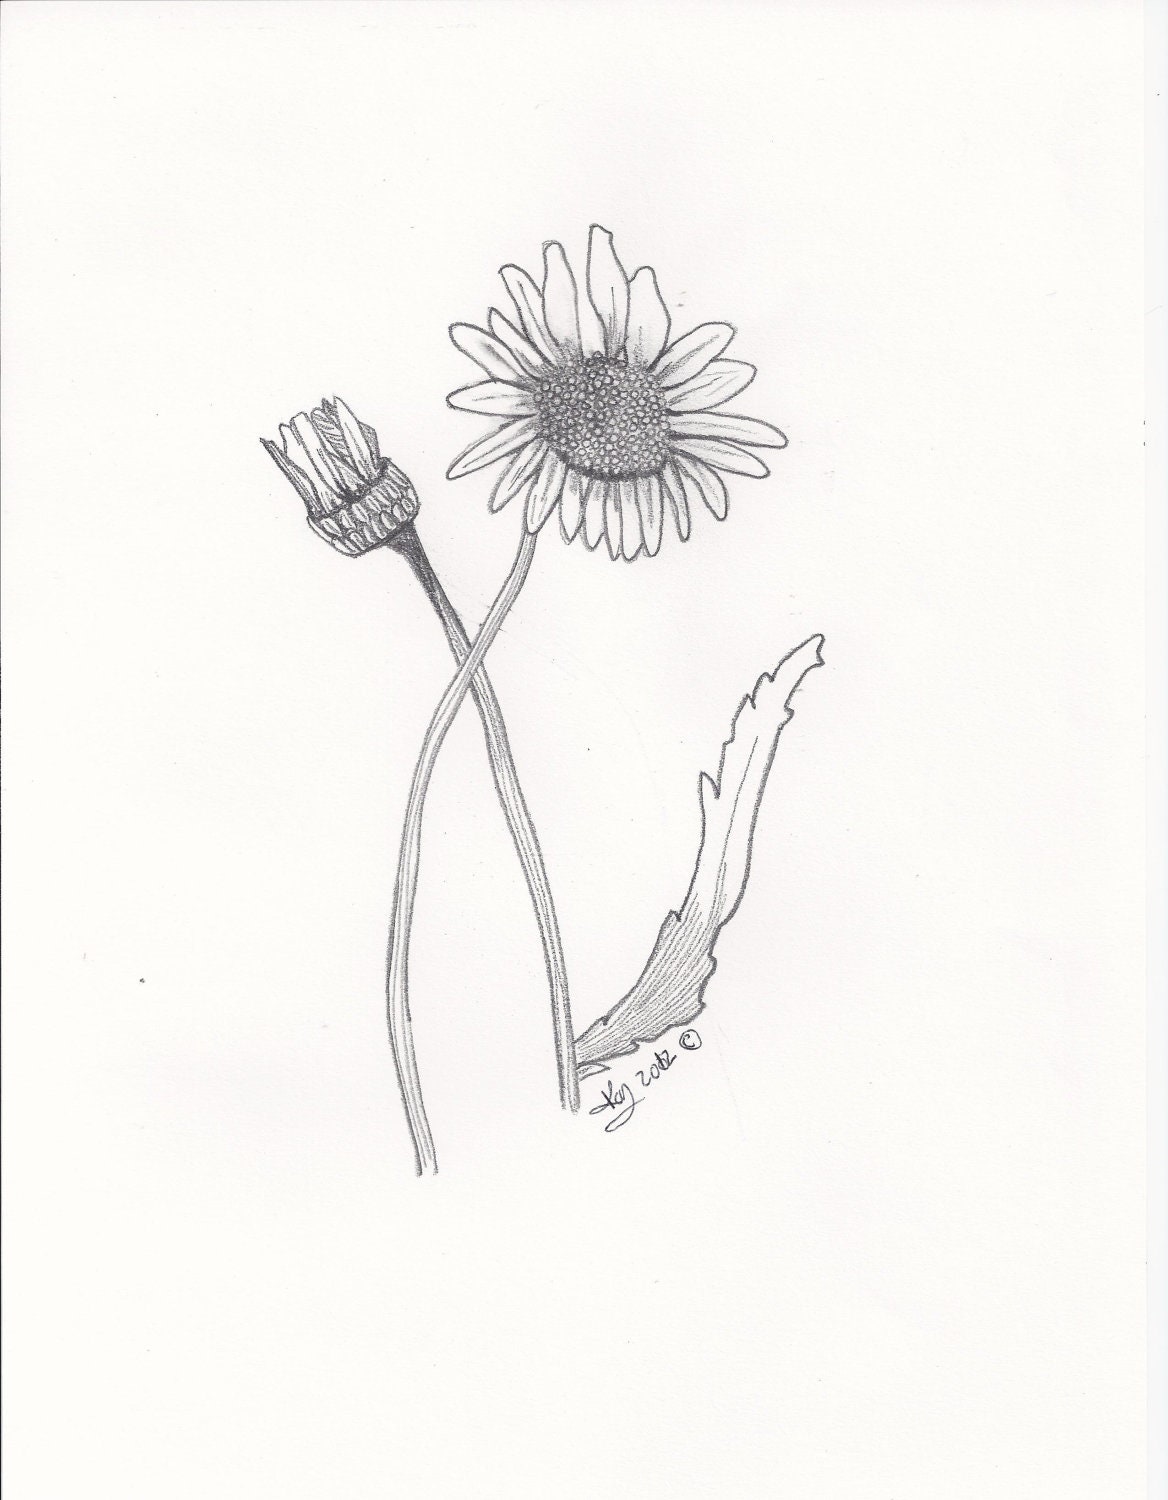 Daisy Flower Print in black and white 5x7 Original Artwork by Reflections of Kayla